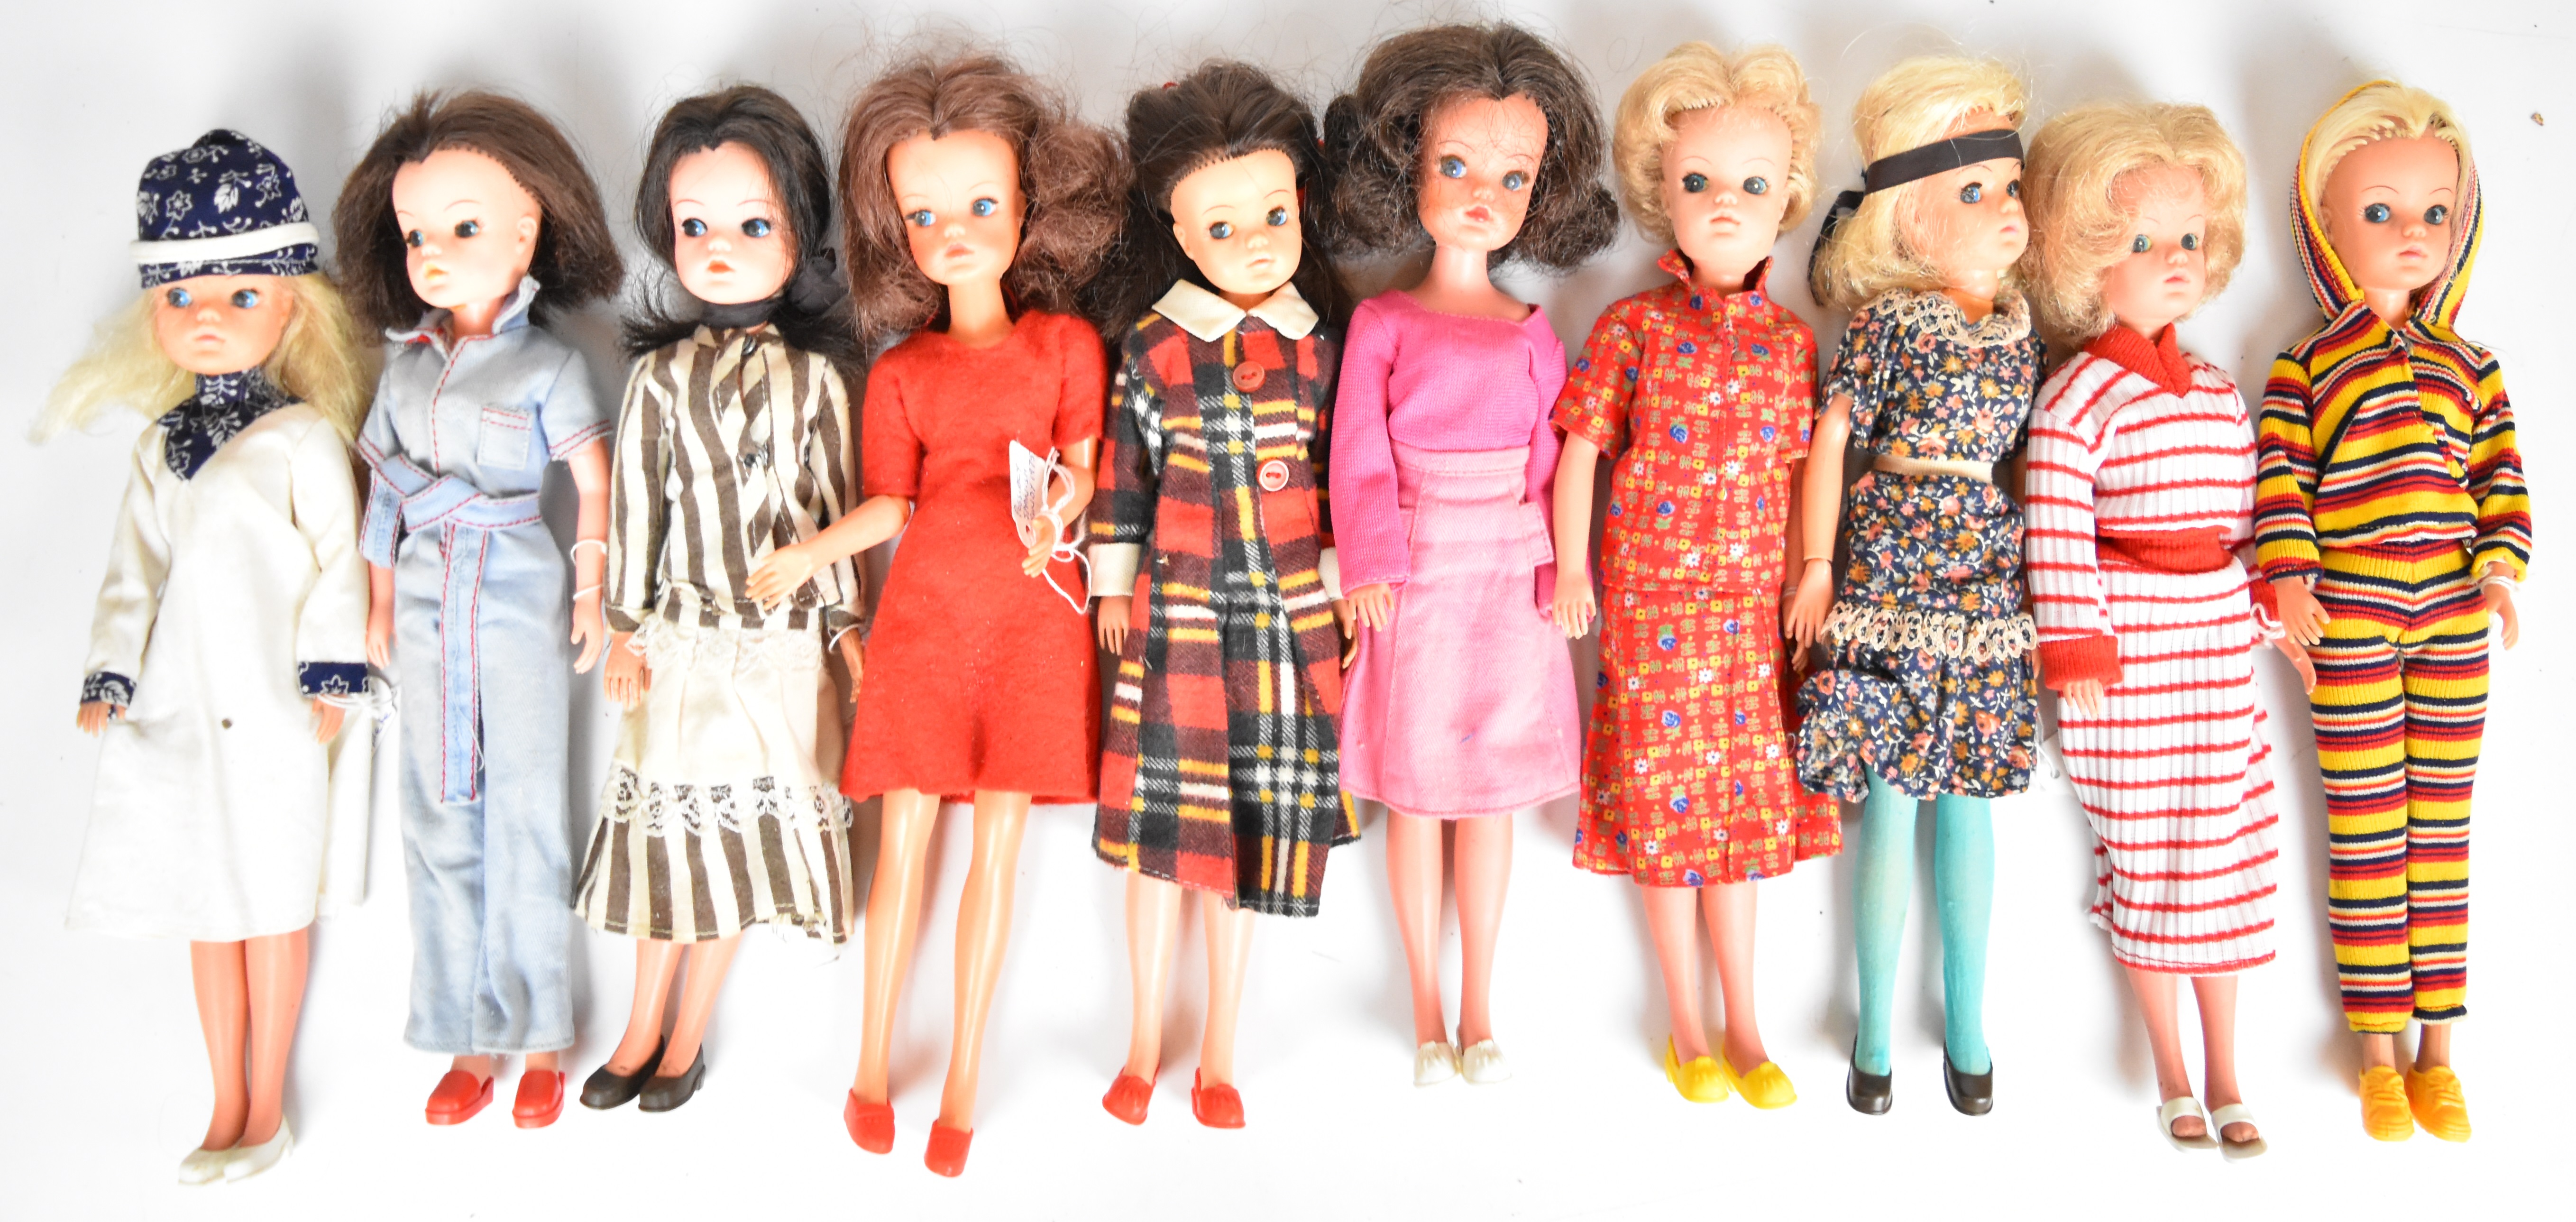 Ten vintage Sindy dolls by Pedigree dressed in original 1970's outfits.